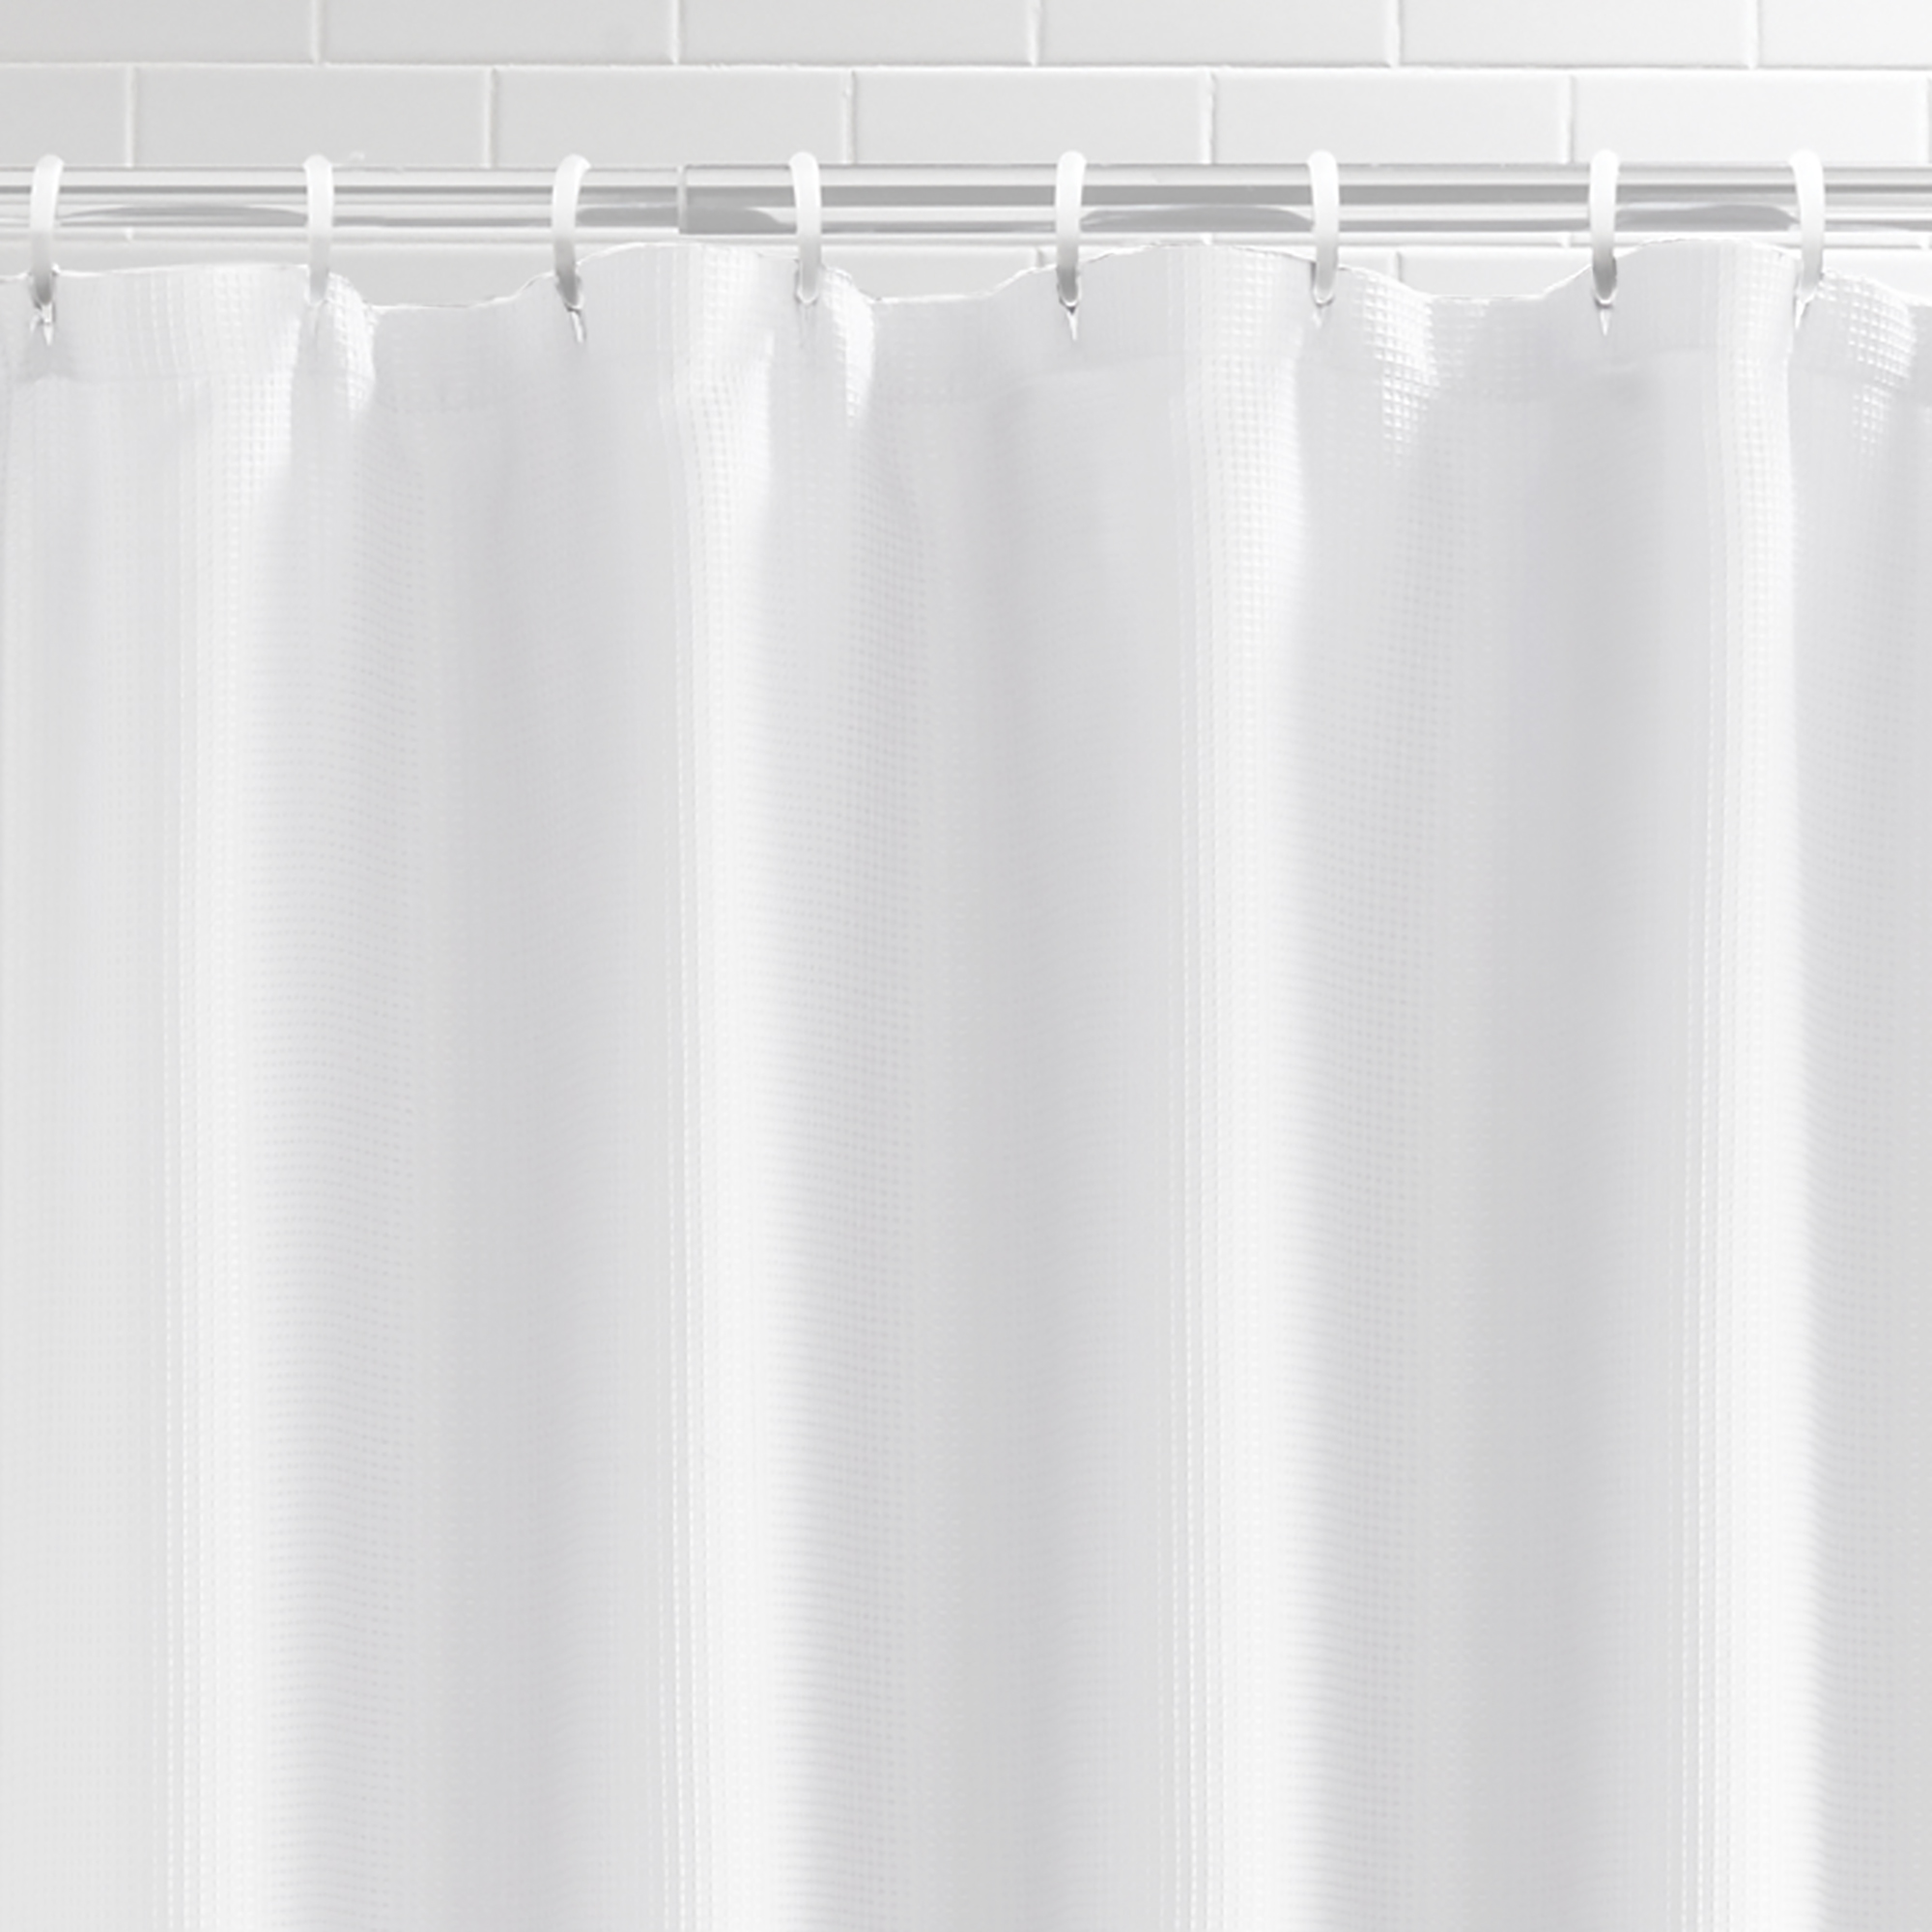 White Fabric Shower Curtain, 70" x 72", Mainstays Classic Waffle Weave Design - image 3 of 5